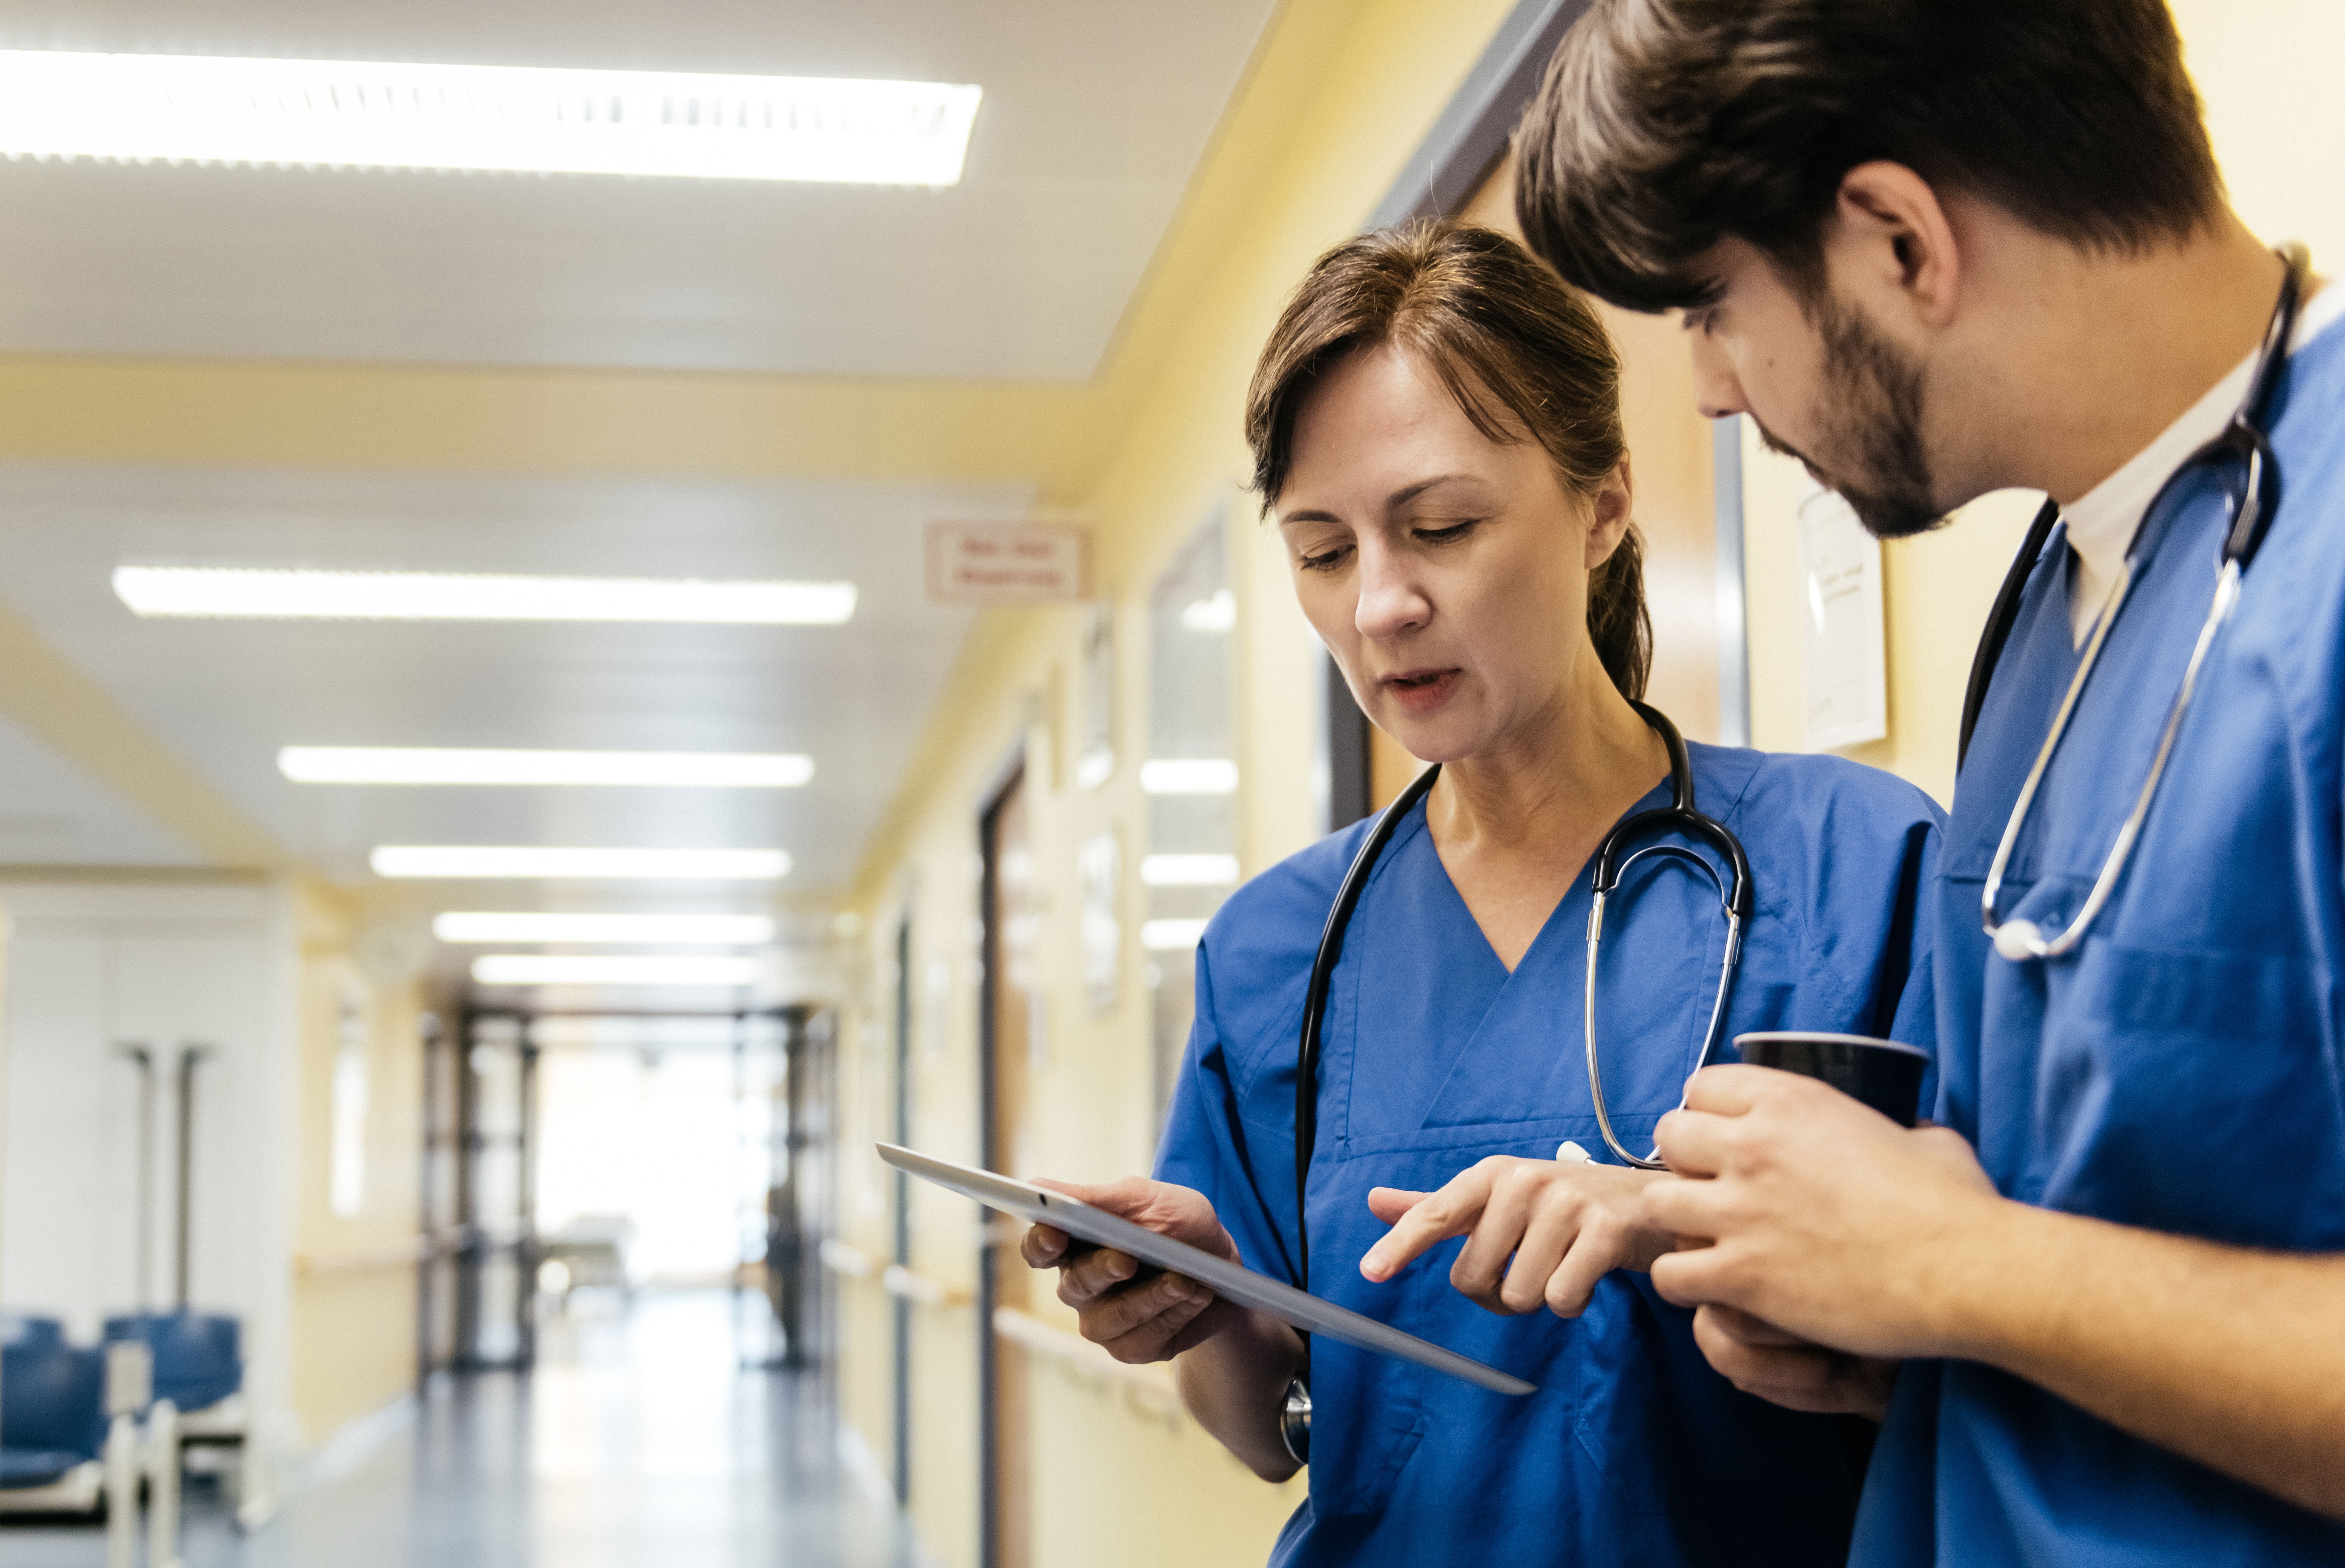 Mature white female doctor and her younger male colleague discussing patient record on a digital tablet while standing in a hospital corridor